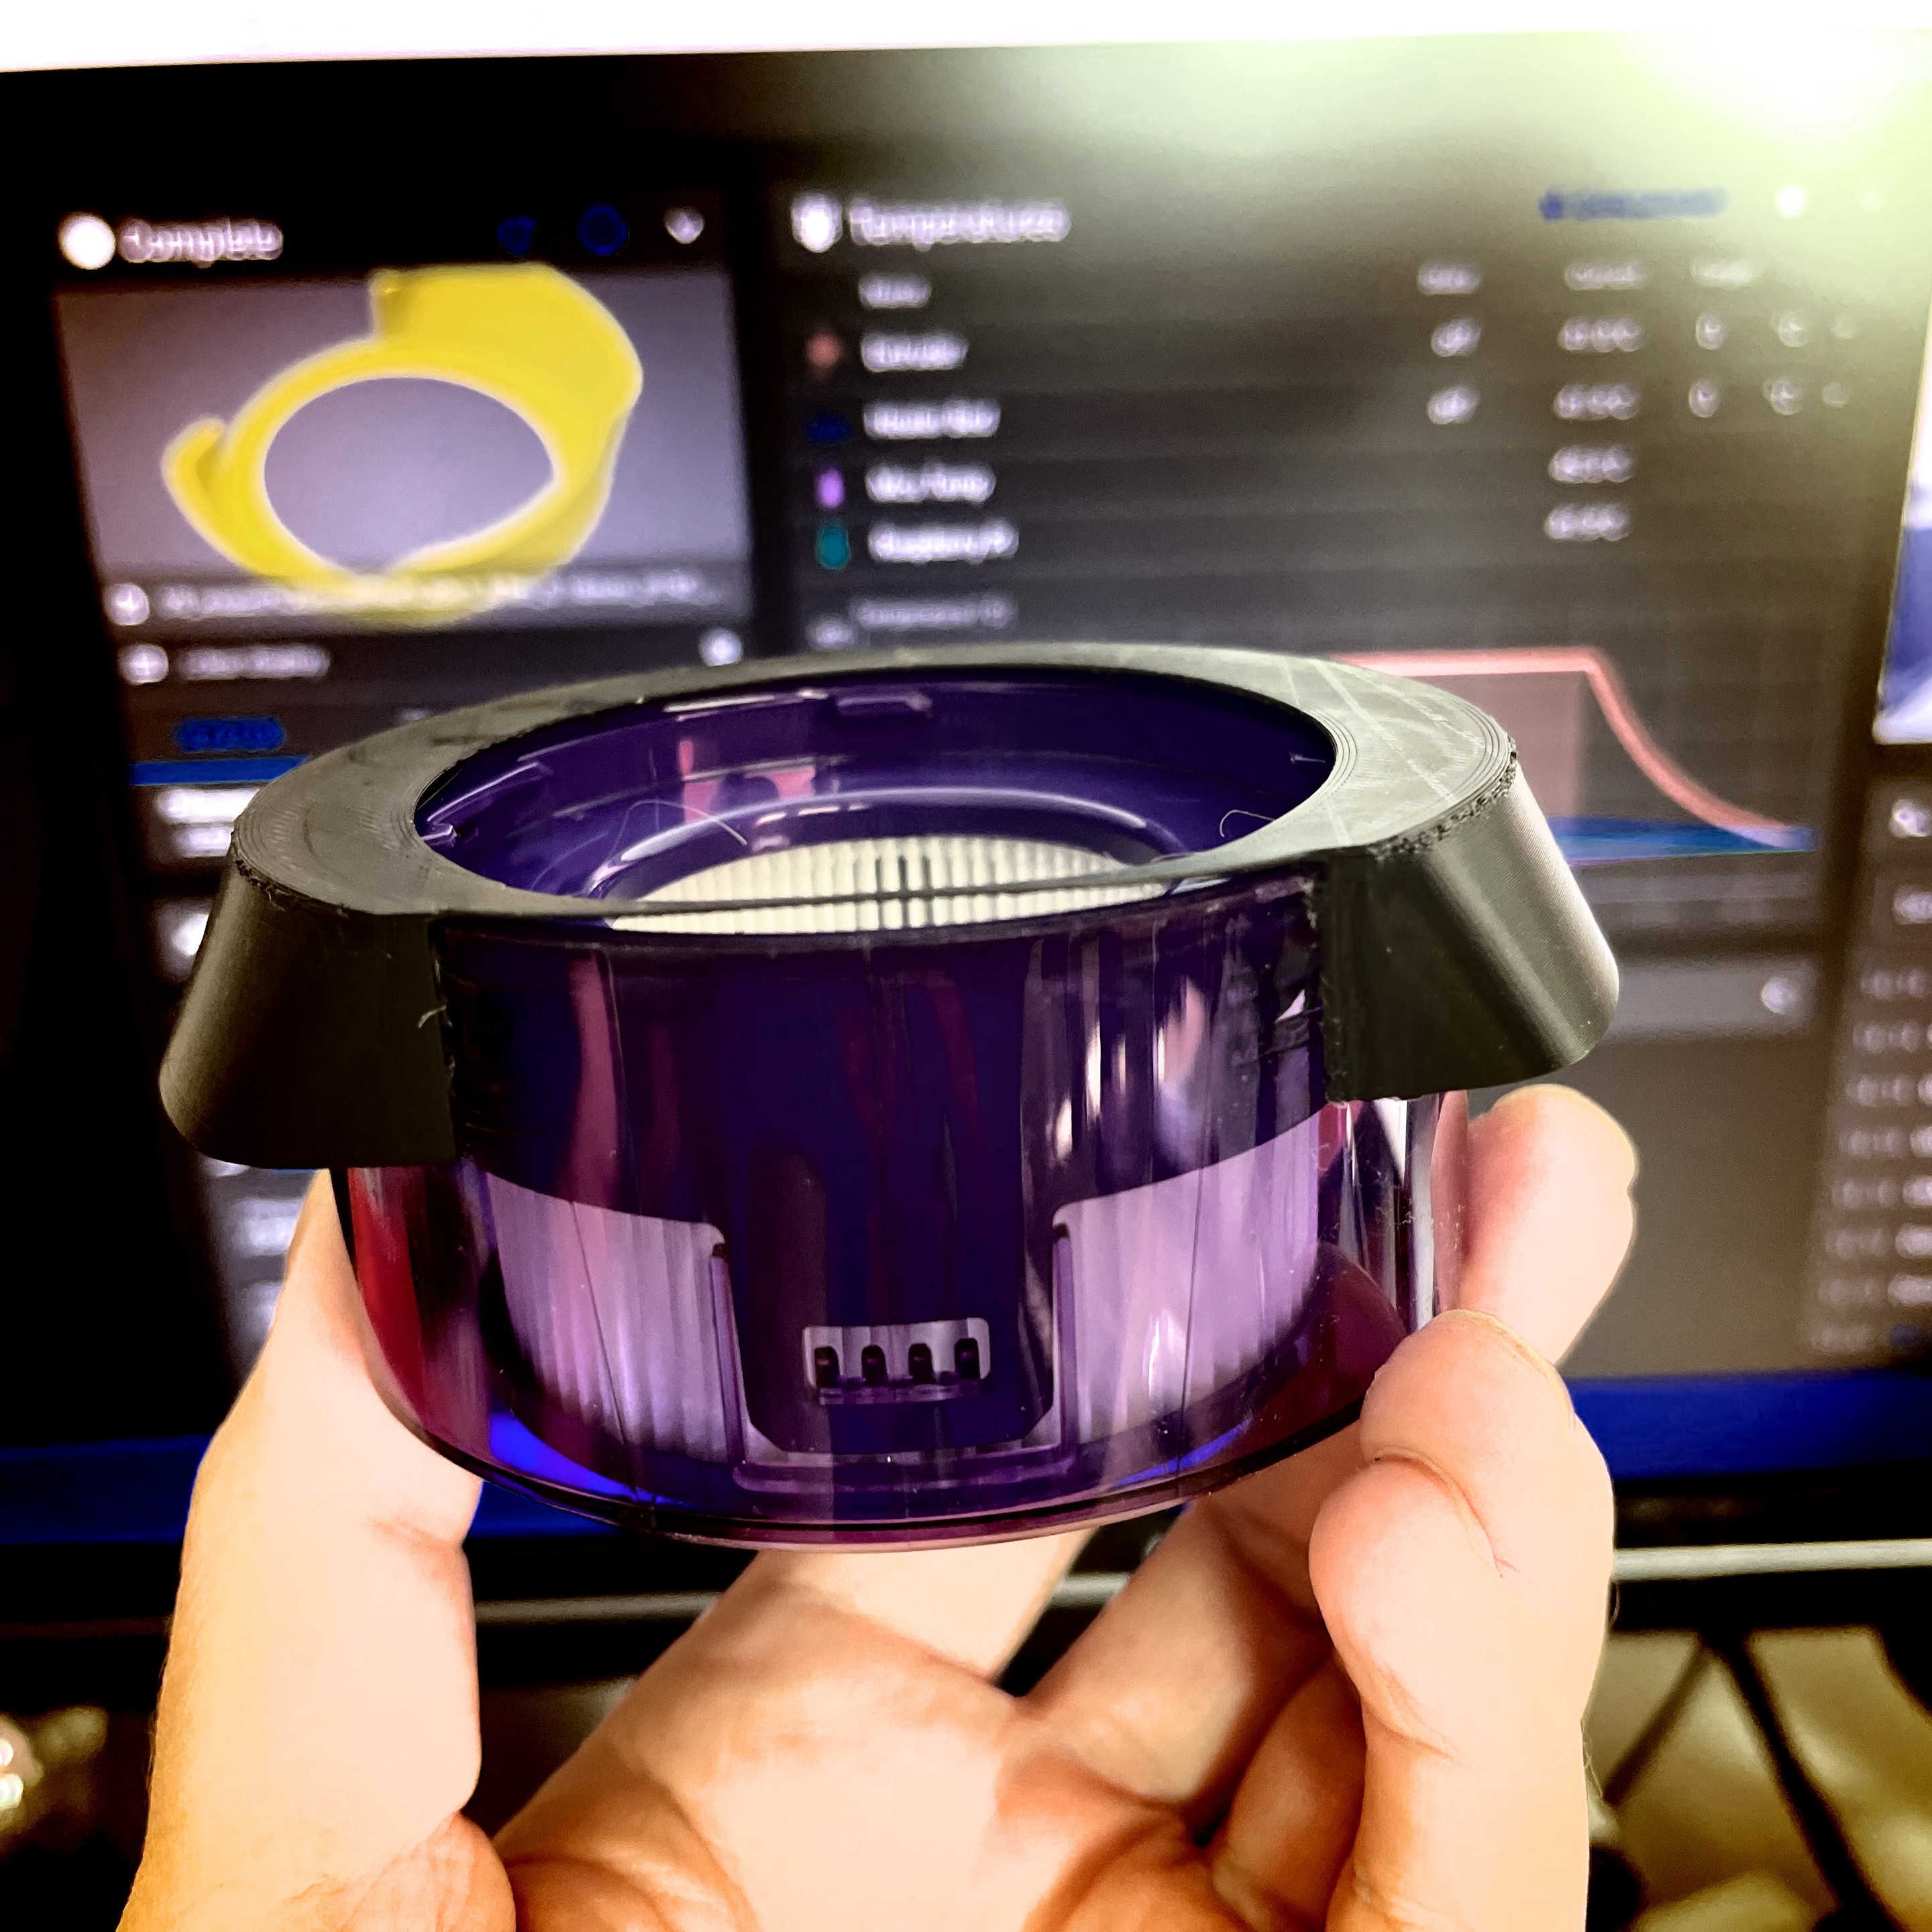 A person holding a Dyson motor filter for vacuum cleaner with a 3D printed lid/air diversion with a blurred computer screen displaying a graphical interface in the background.